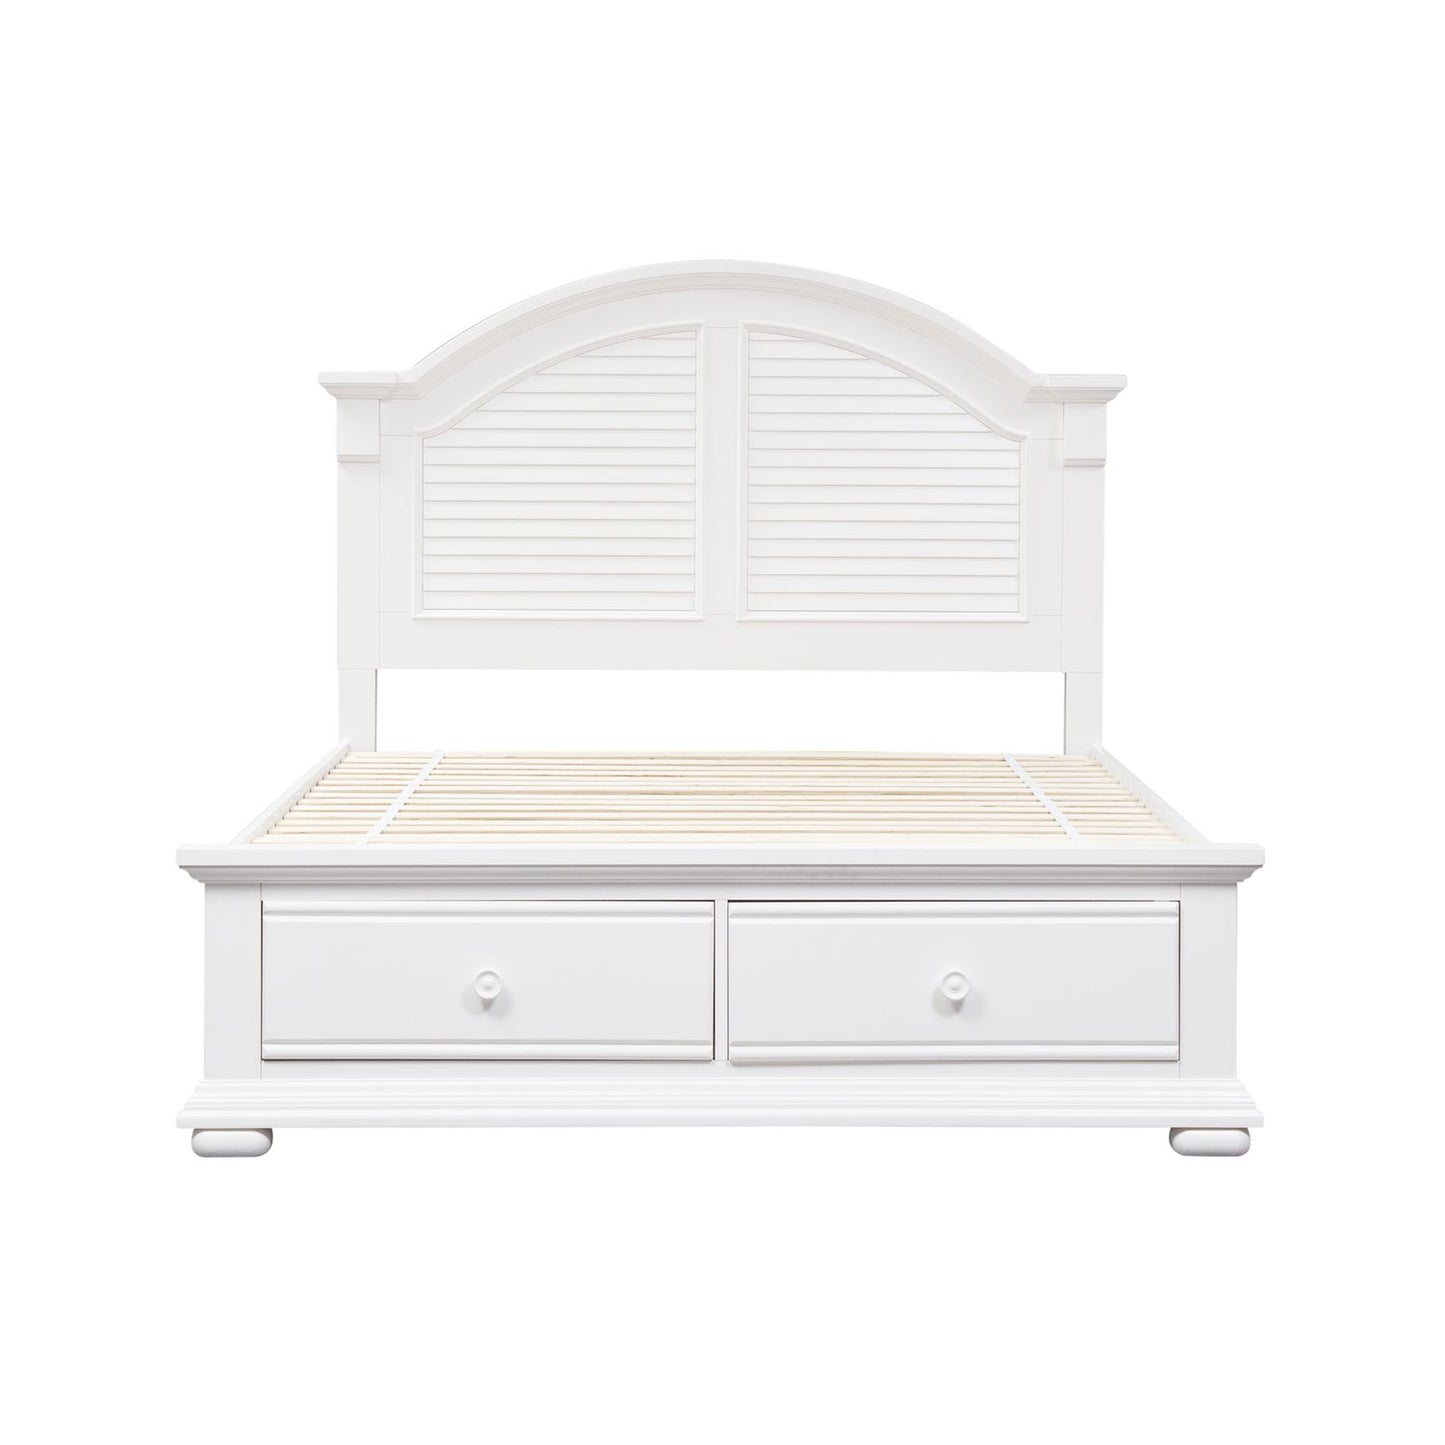 Summer House I - Queen Storage Bed